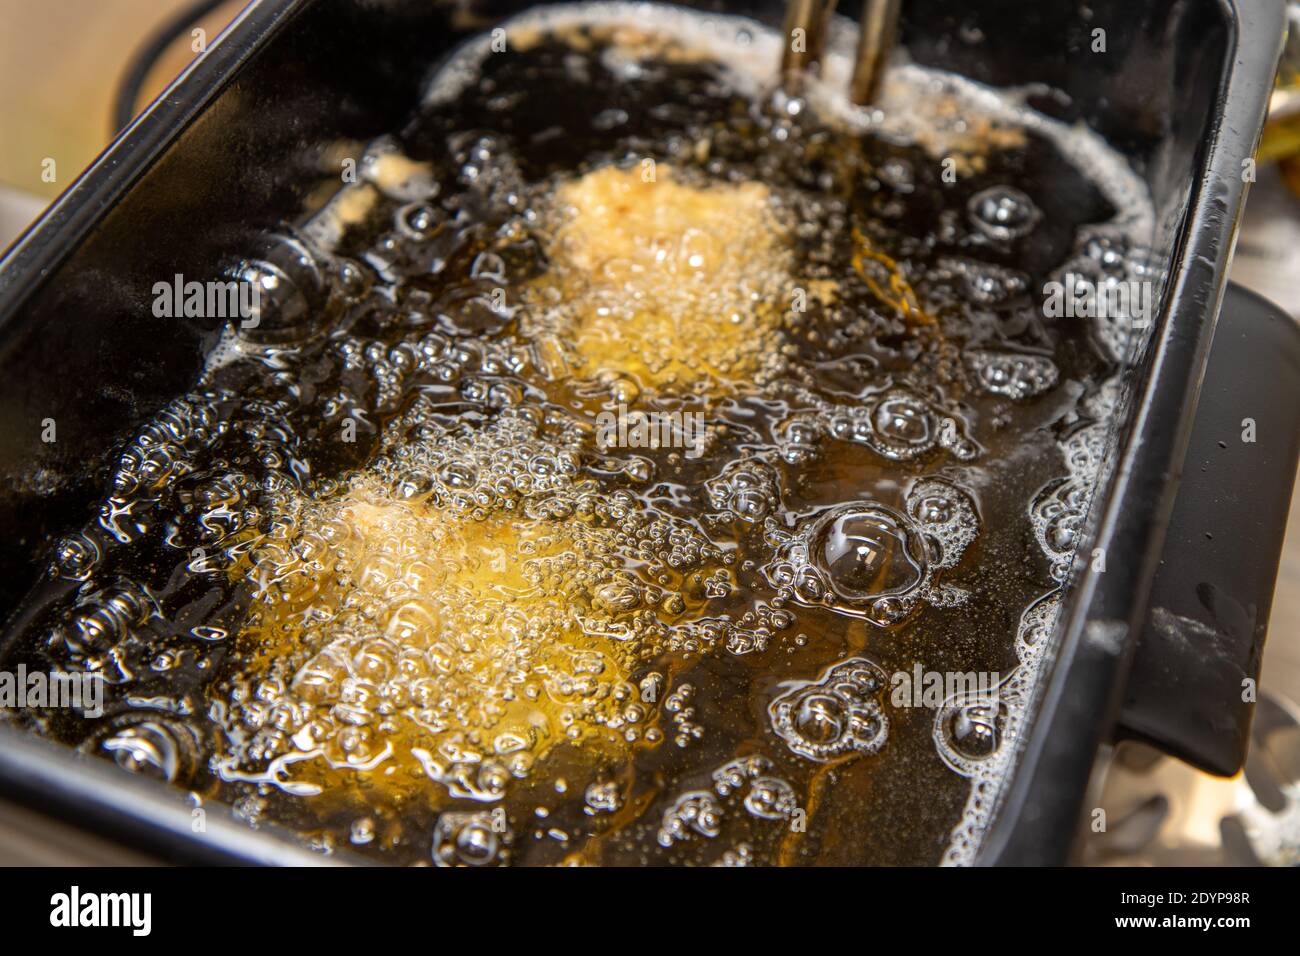 A oil frier with food and chicken cooking in the frier Stock Photo